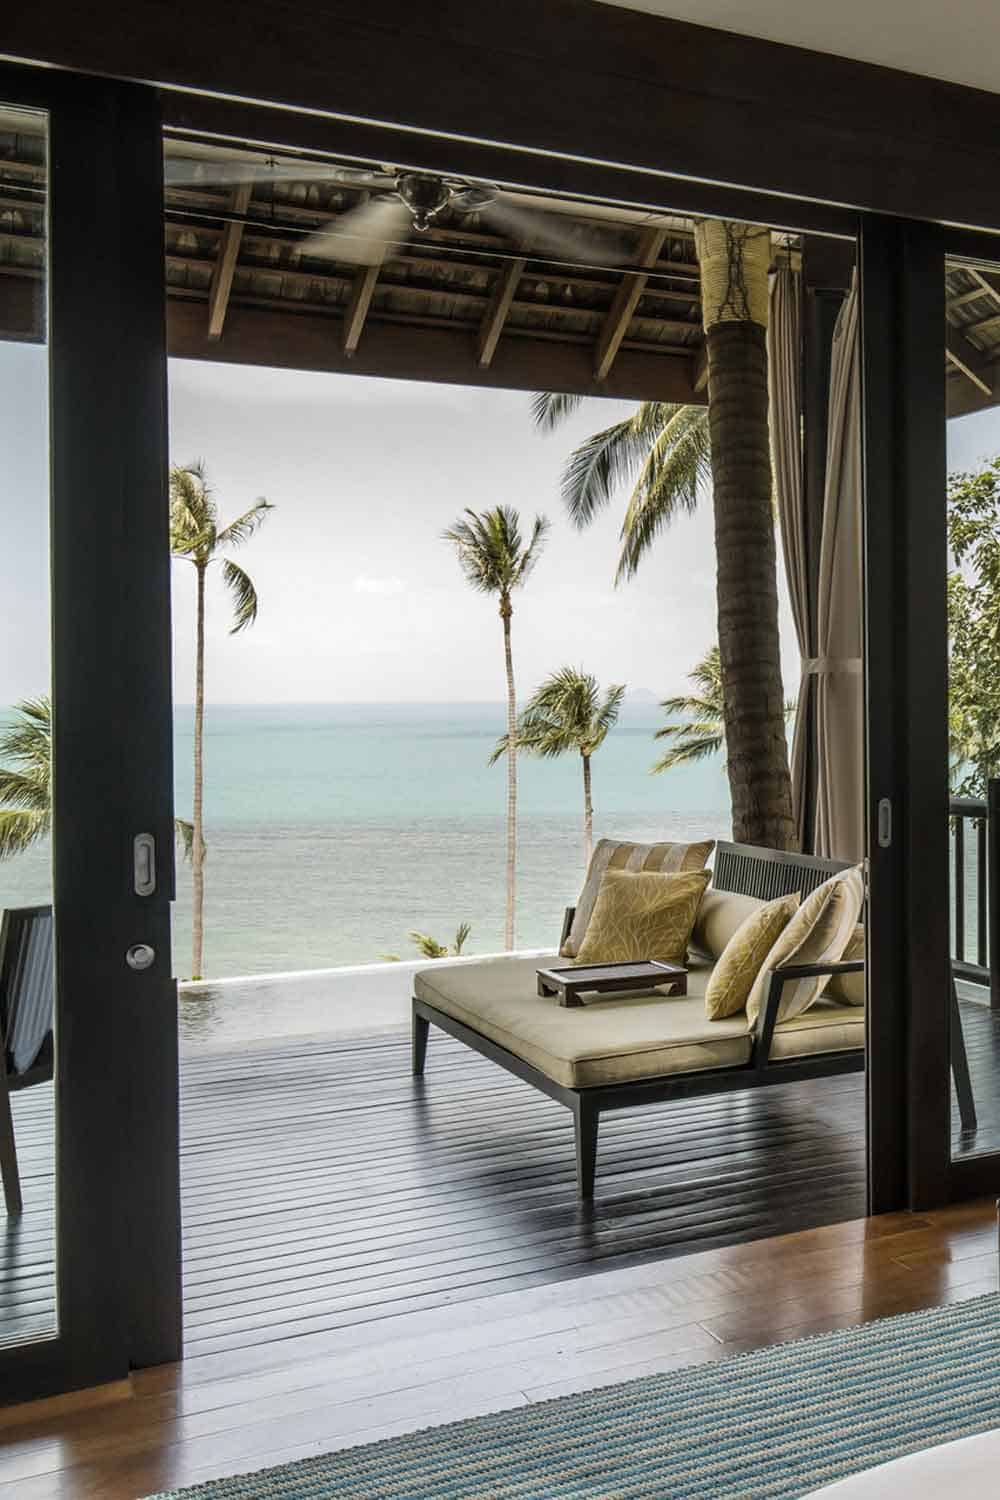 Discover All 4 Luxurious Four Seasons Thailand Hotels & Resorts